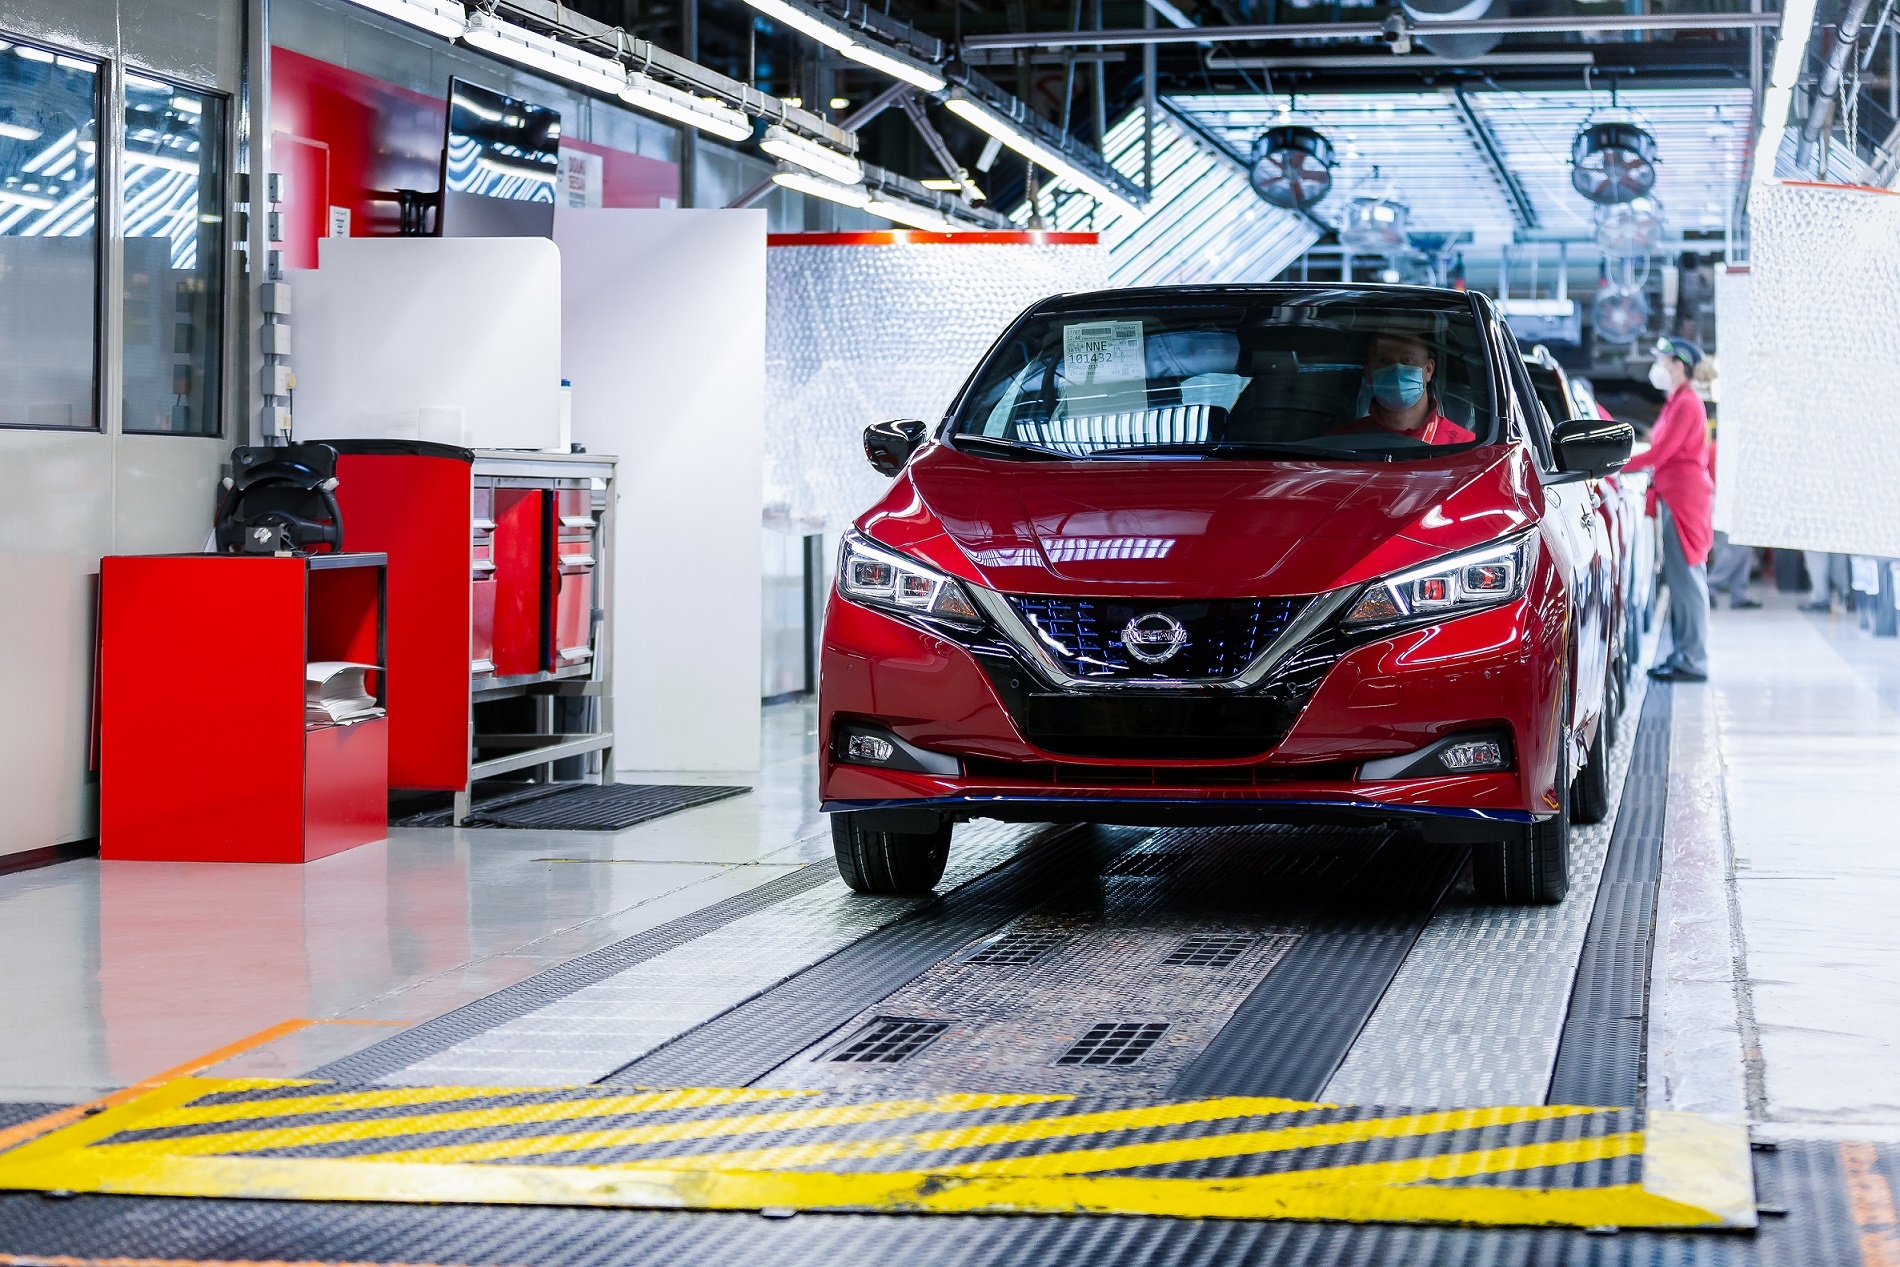 Nissan celebrates production of the 500,000th LEAF